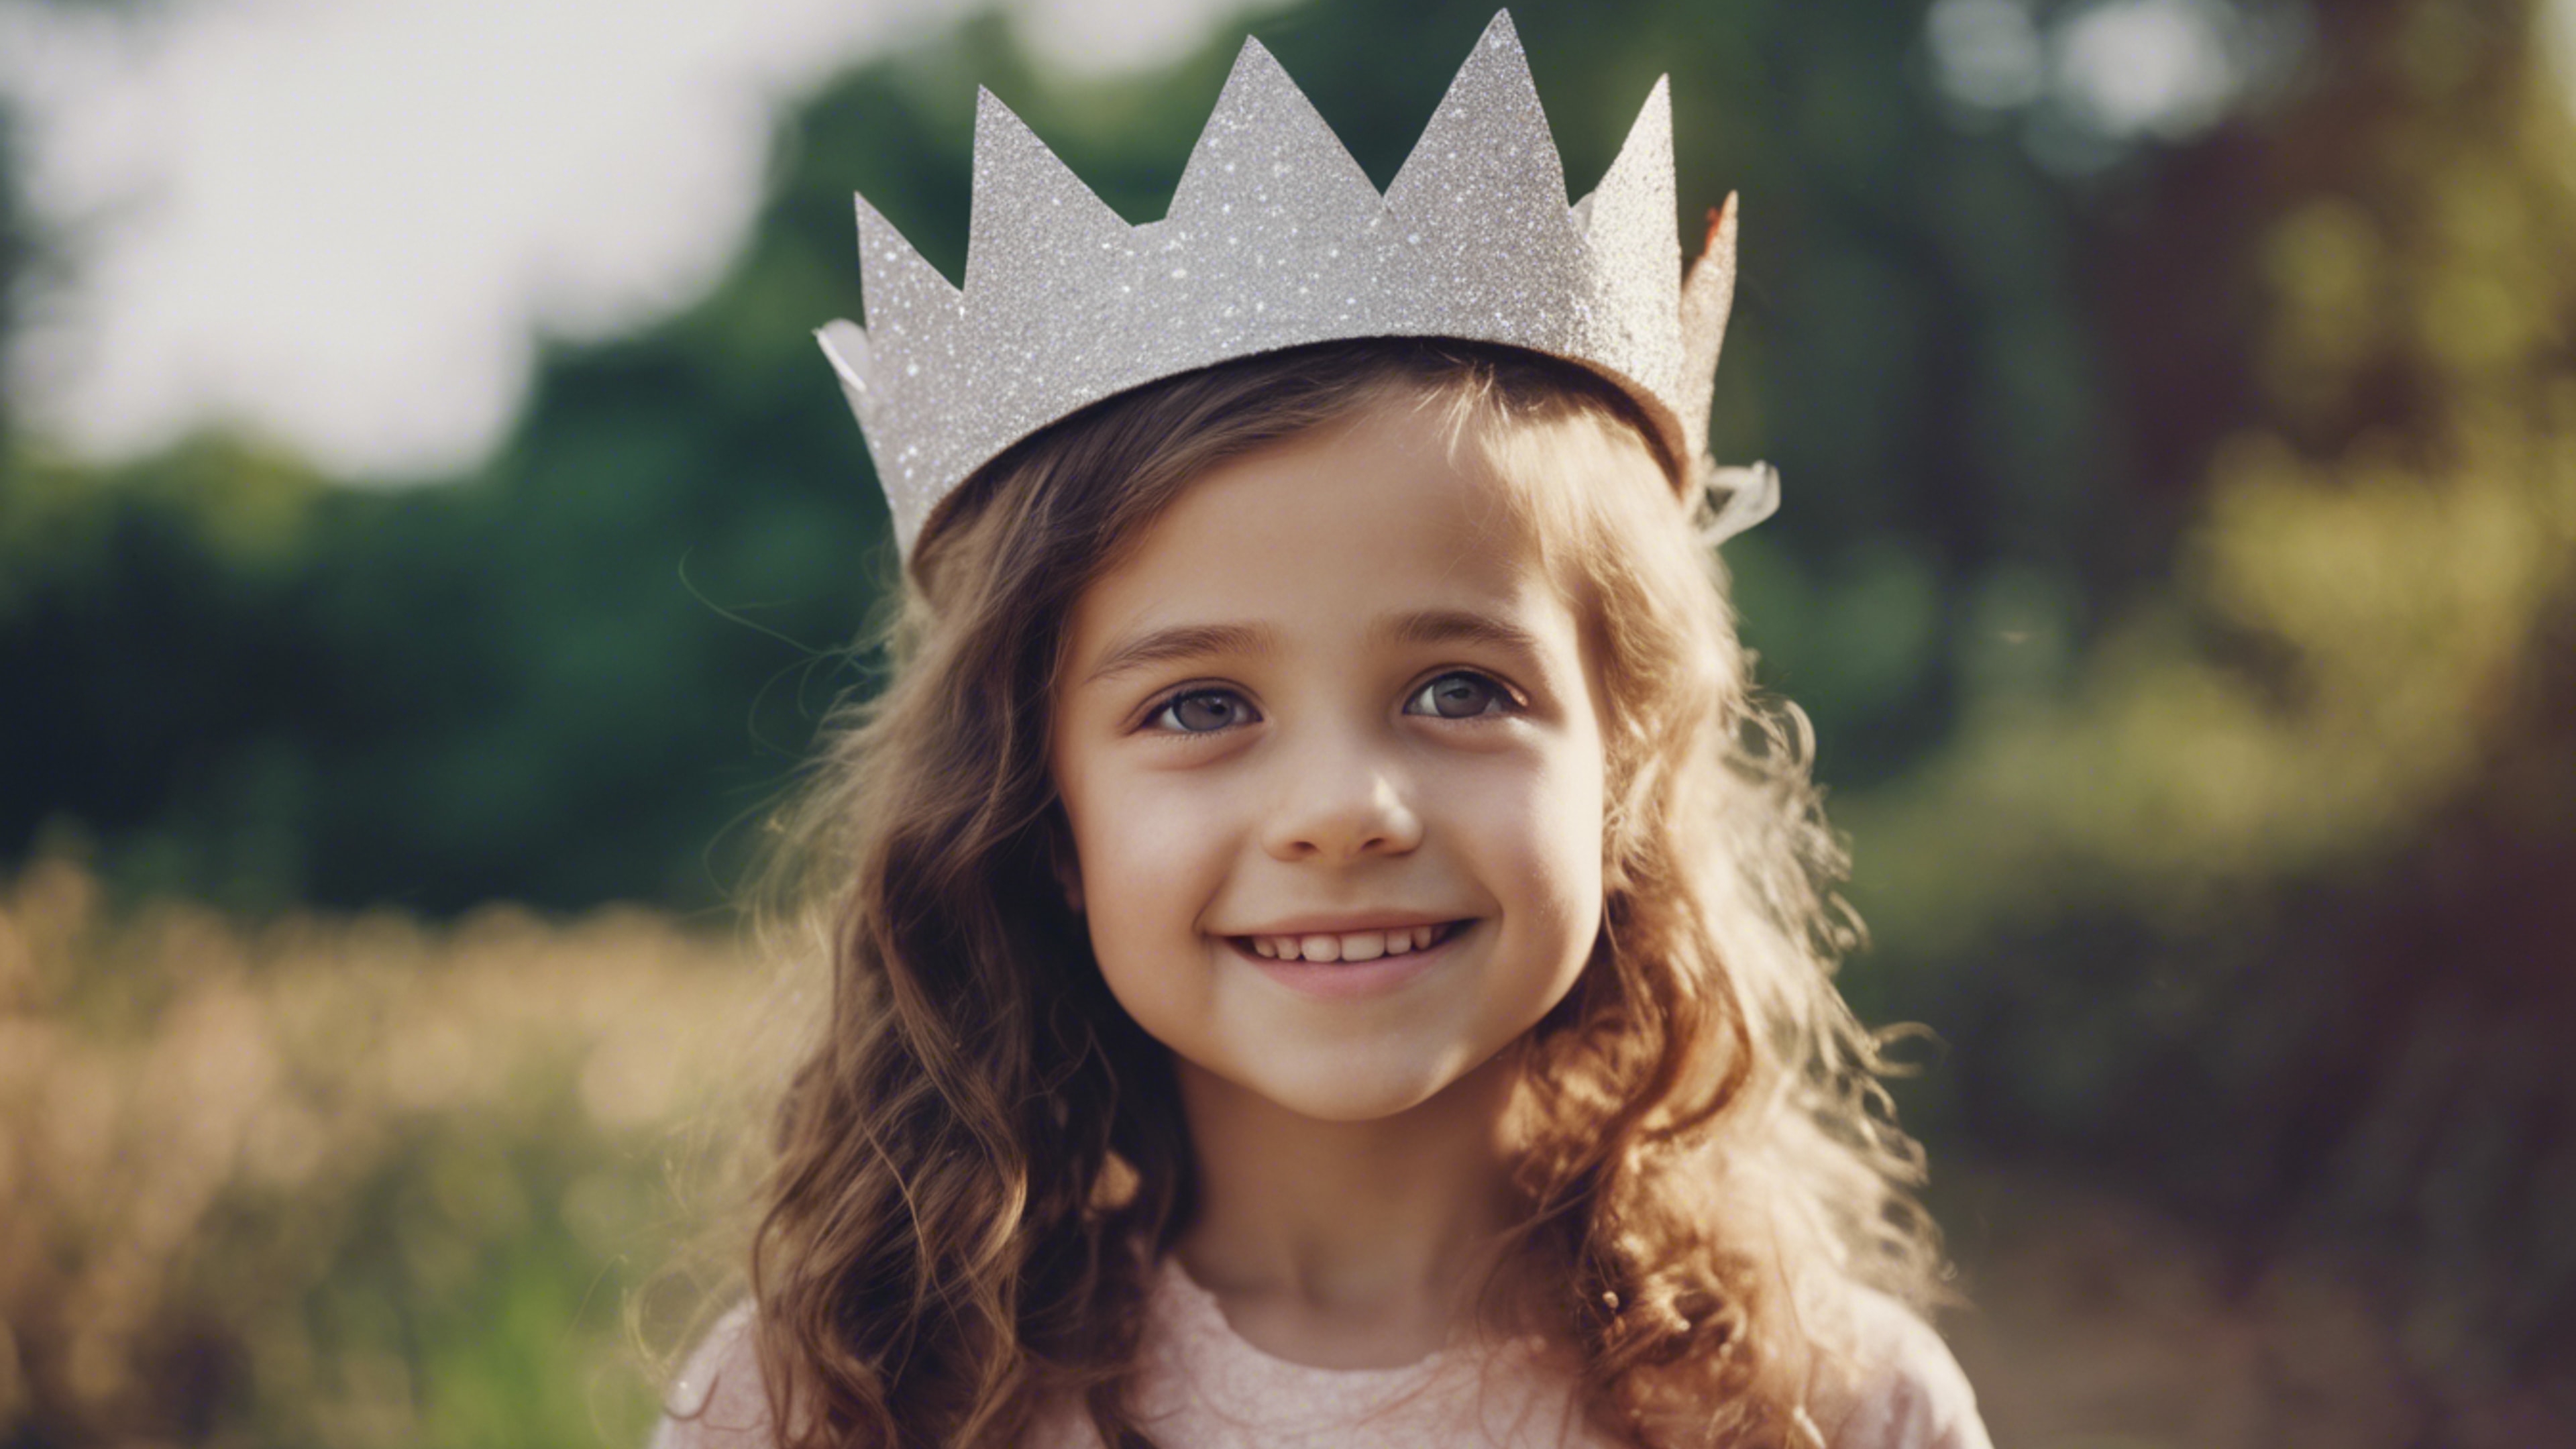 A young girl with sparkling eyes, happily wearing a homemade paper crown. Tapet[aa9d8265bf9b488b9728]